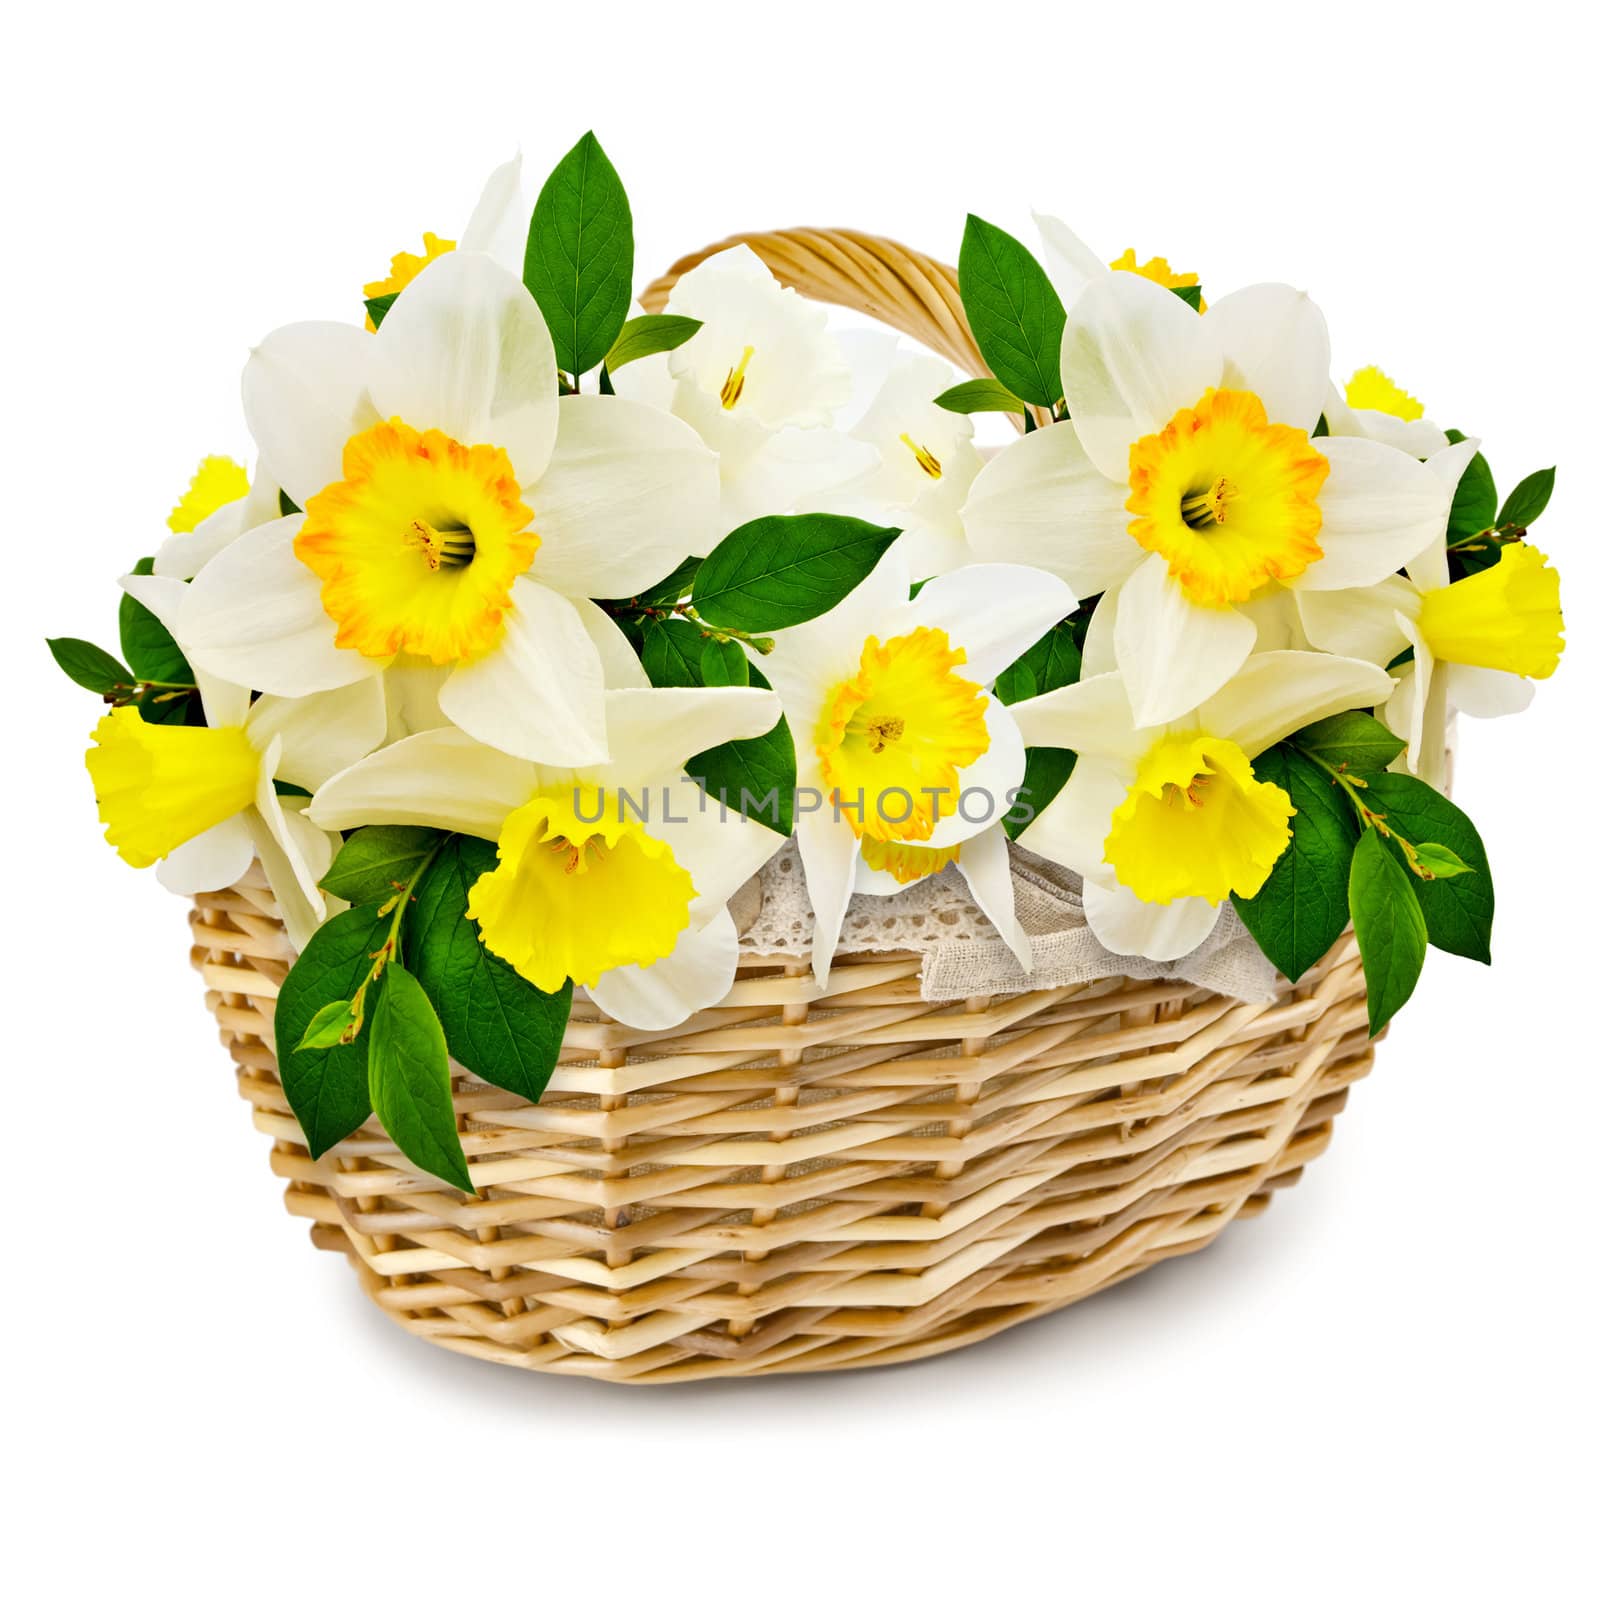 handmade wicker basket with narcissus over white